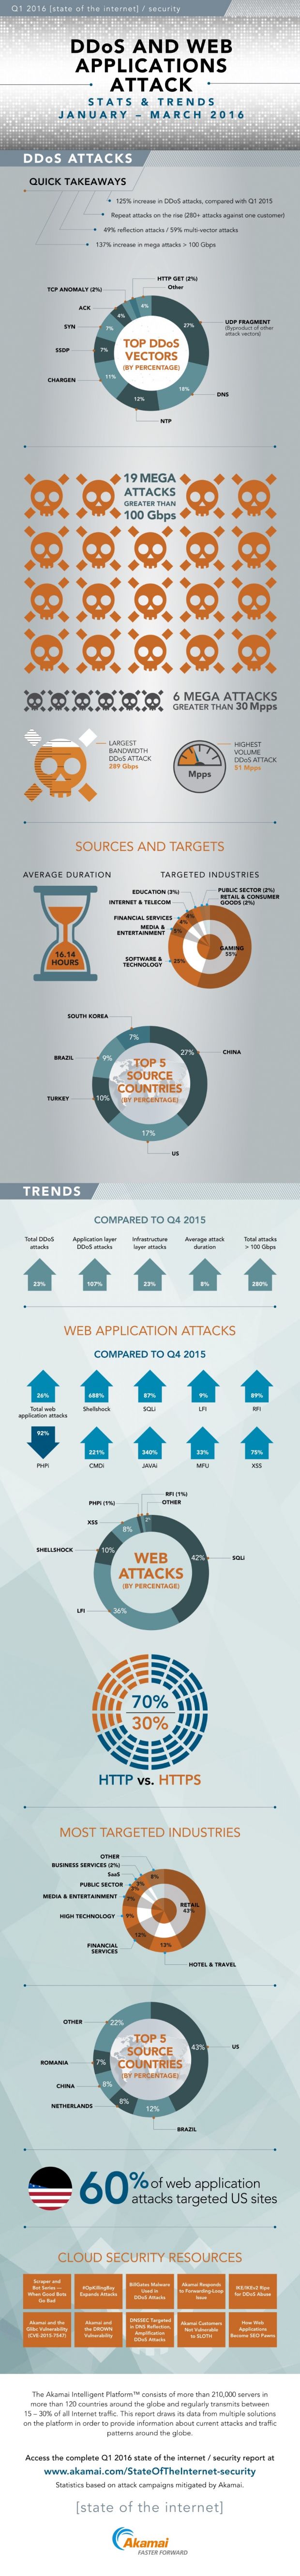 DDoS attacks in Q1 2016 infographic